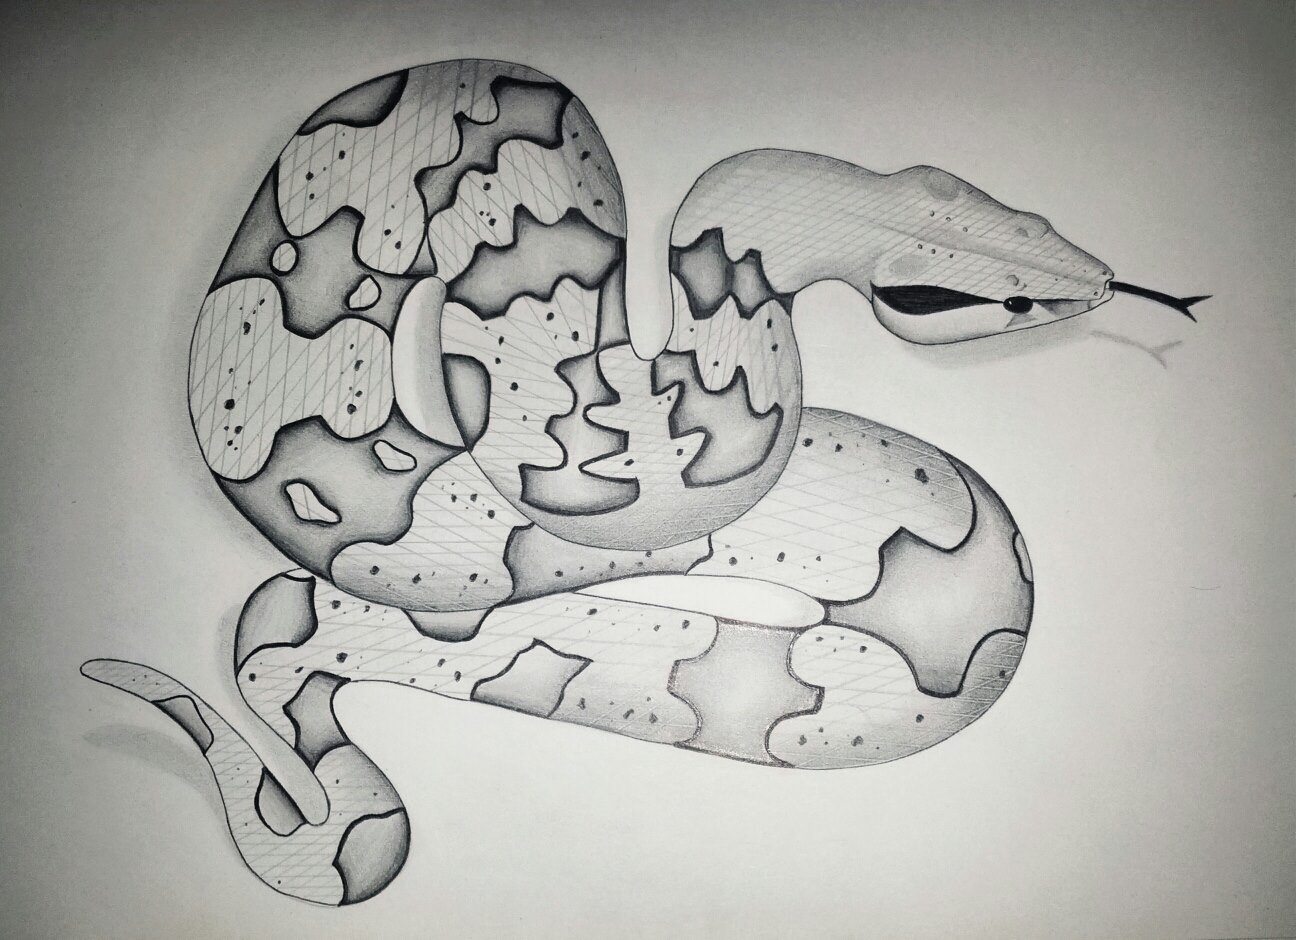 How to draw 3d Snake Step by step, snake 3d - thirstymag.com